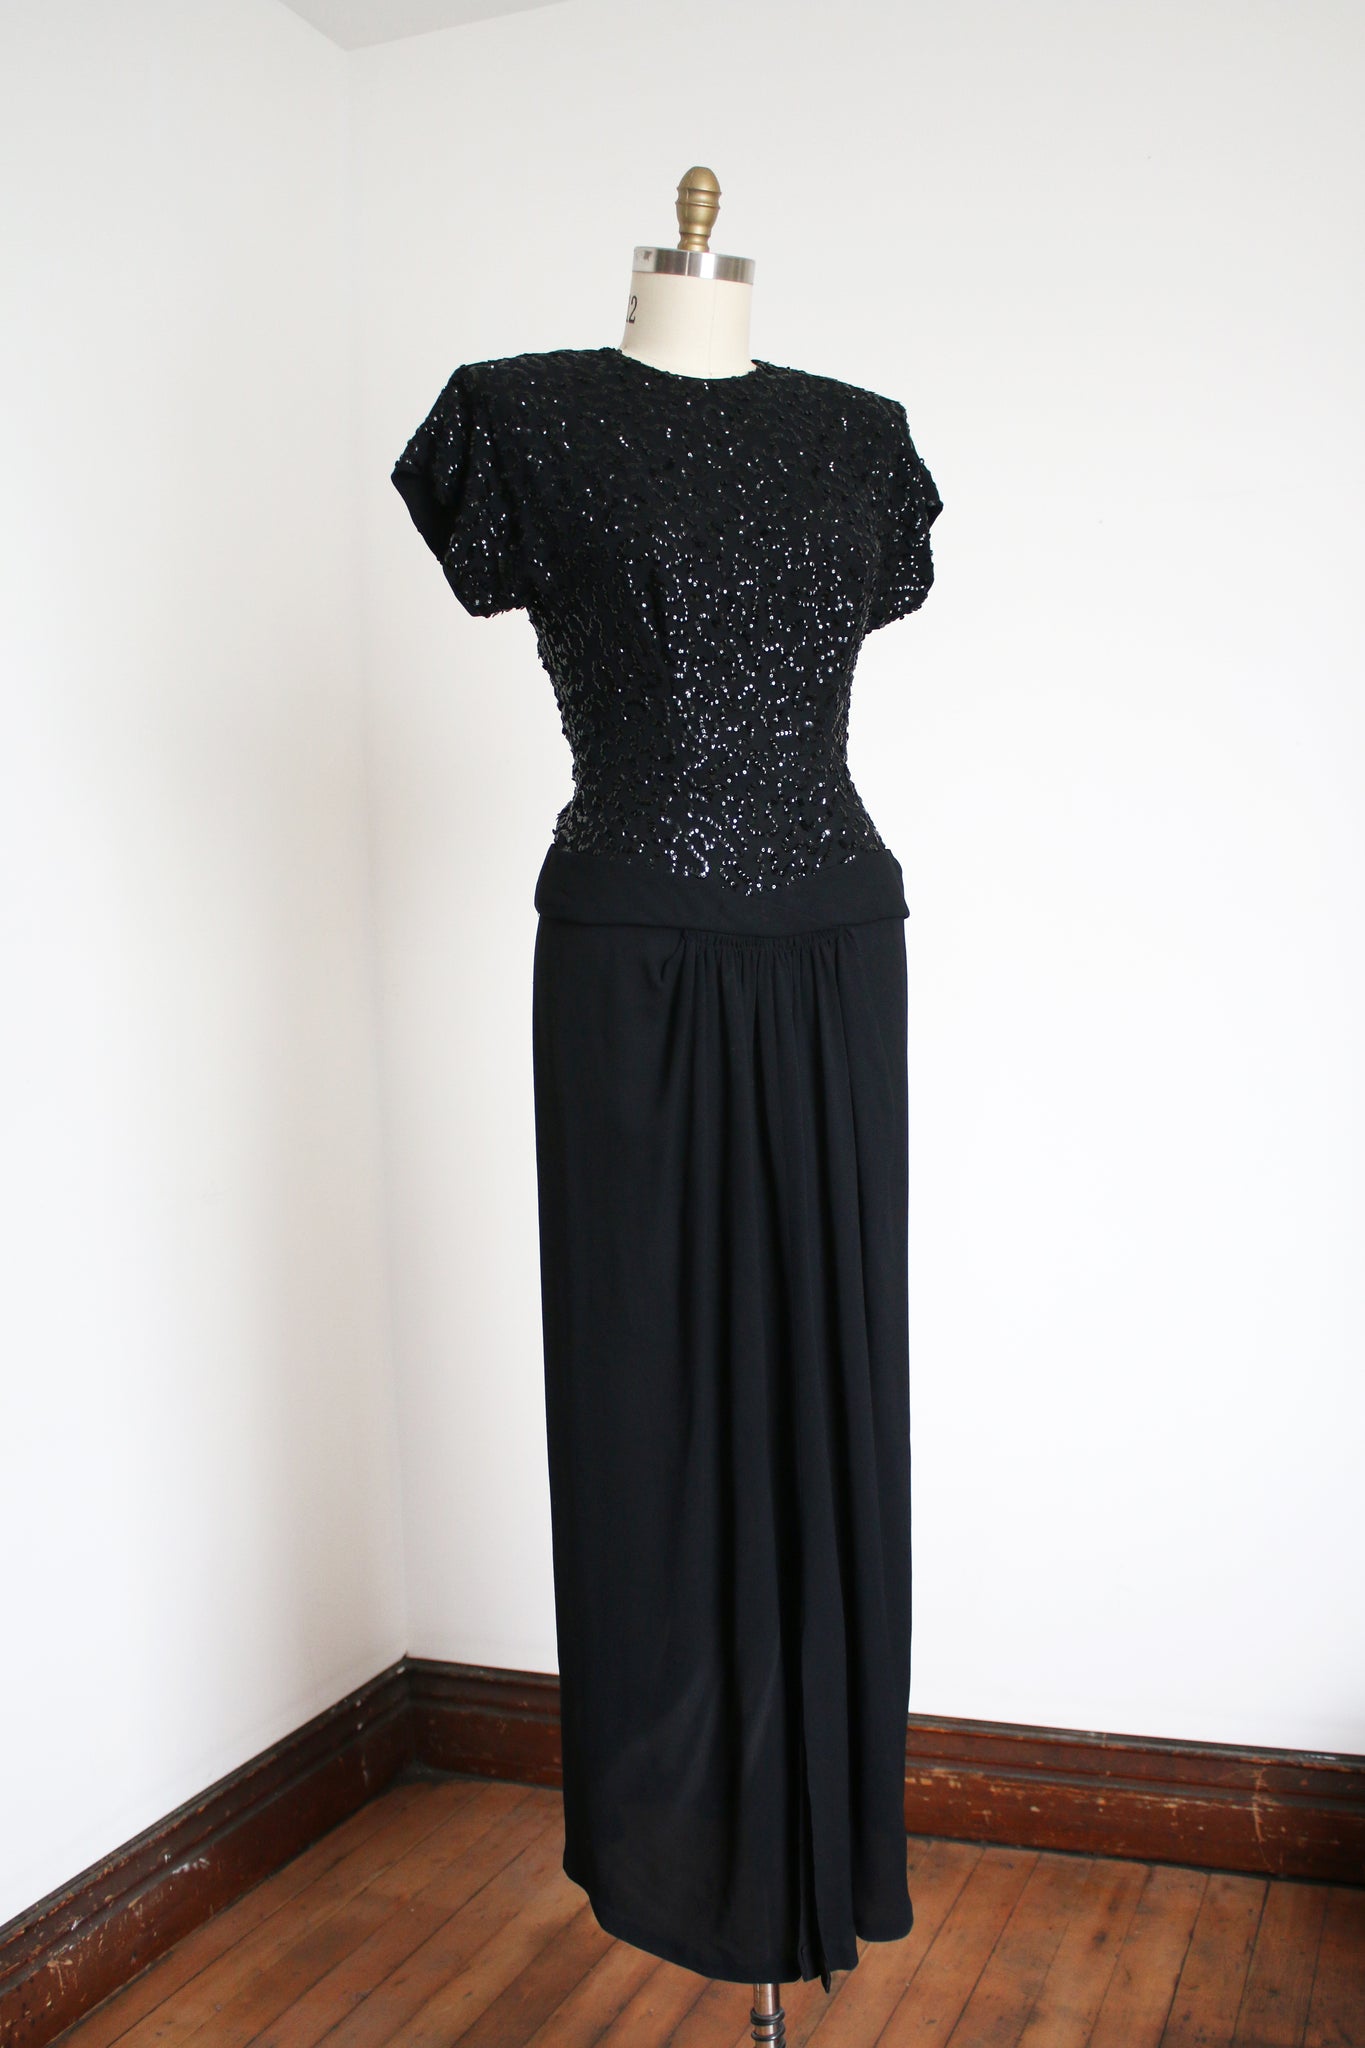 Vintage 1920s Crepe & Lace Gown Black Evening Dress, fits 36 inch bust,  with issues